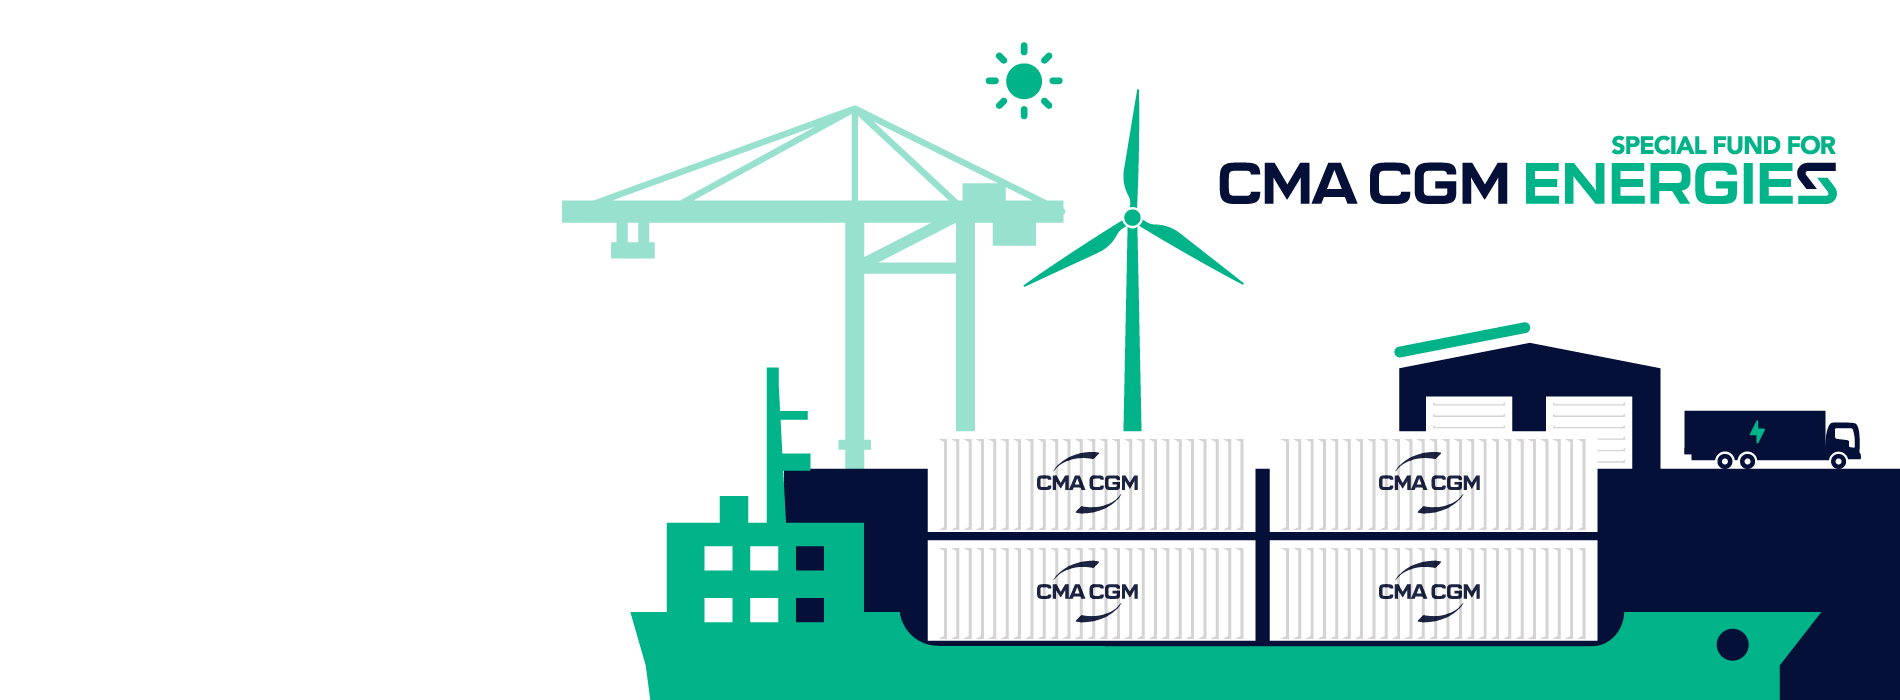 CMA CGM creates a USD 1.5 billion Special Fund for Energies to accelerate the energy transition in shipping and logistics